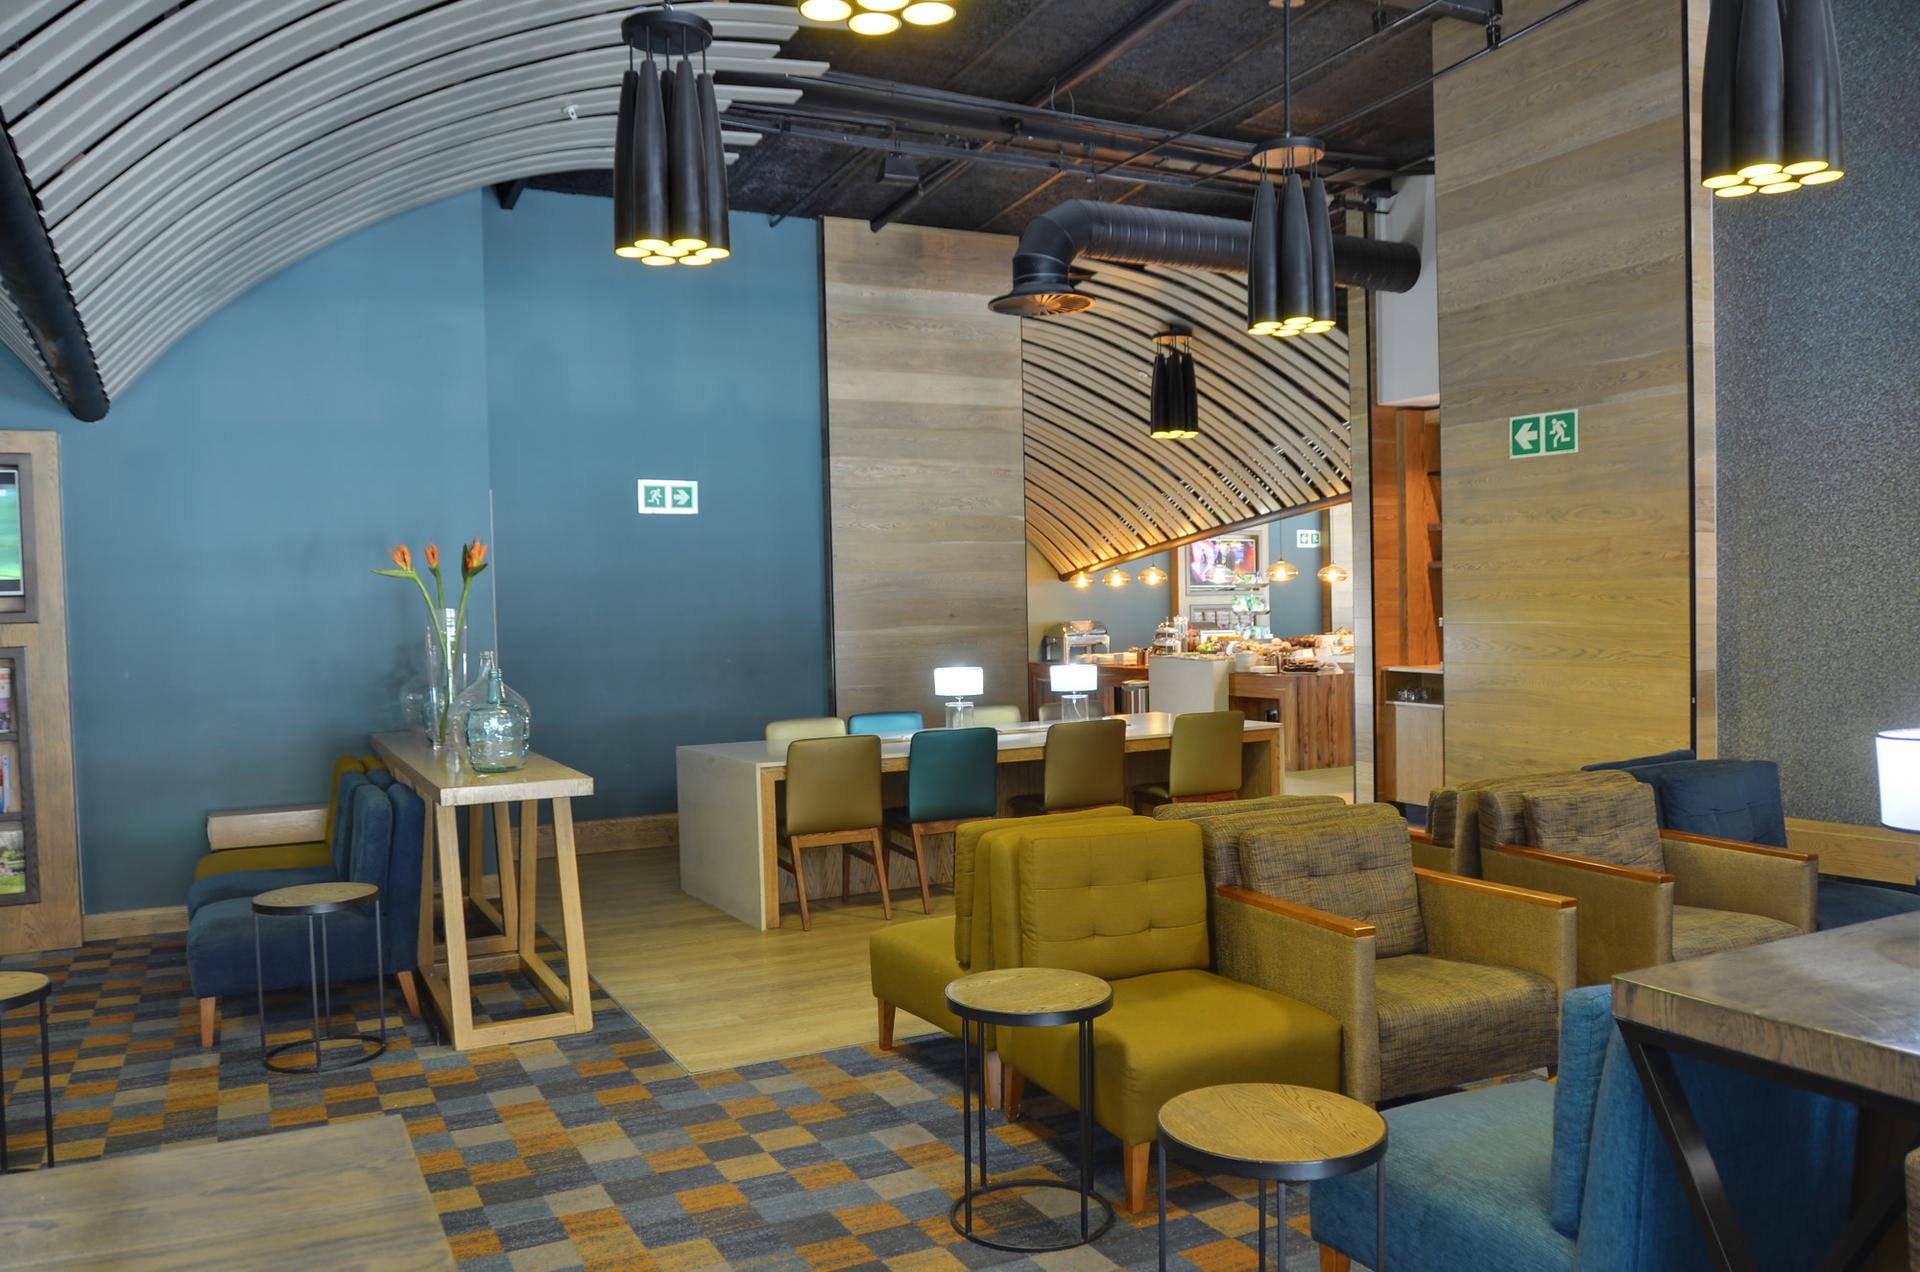 CPT International Sky Lounge image 9 of 15